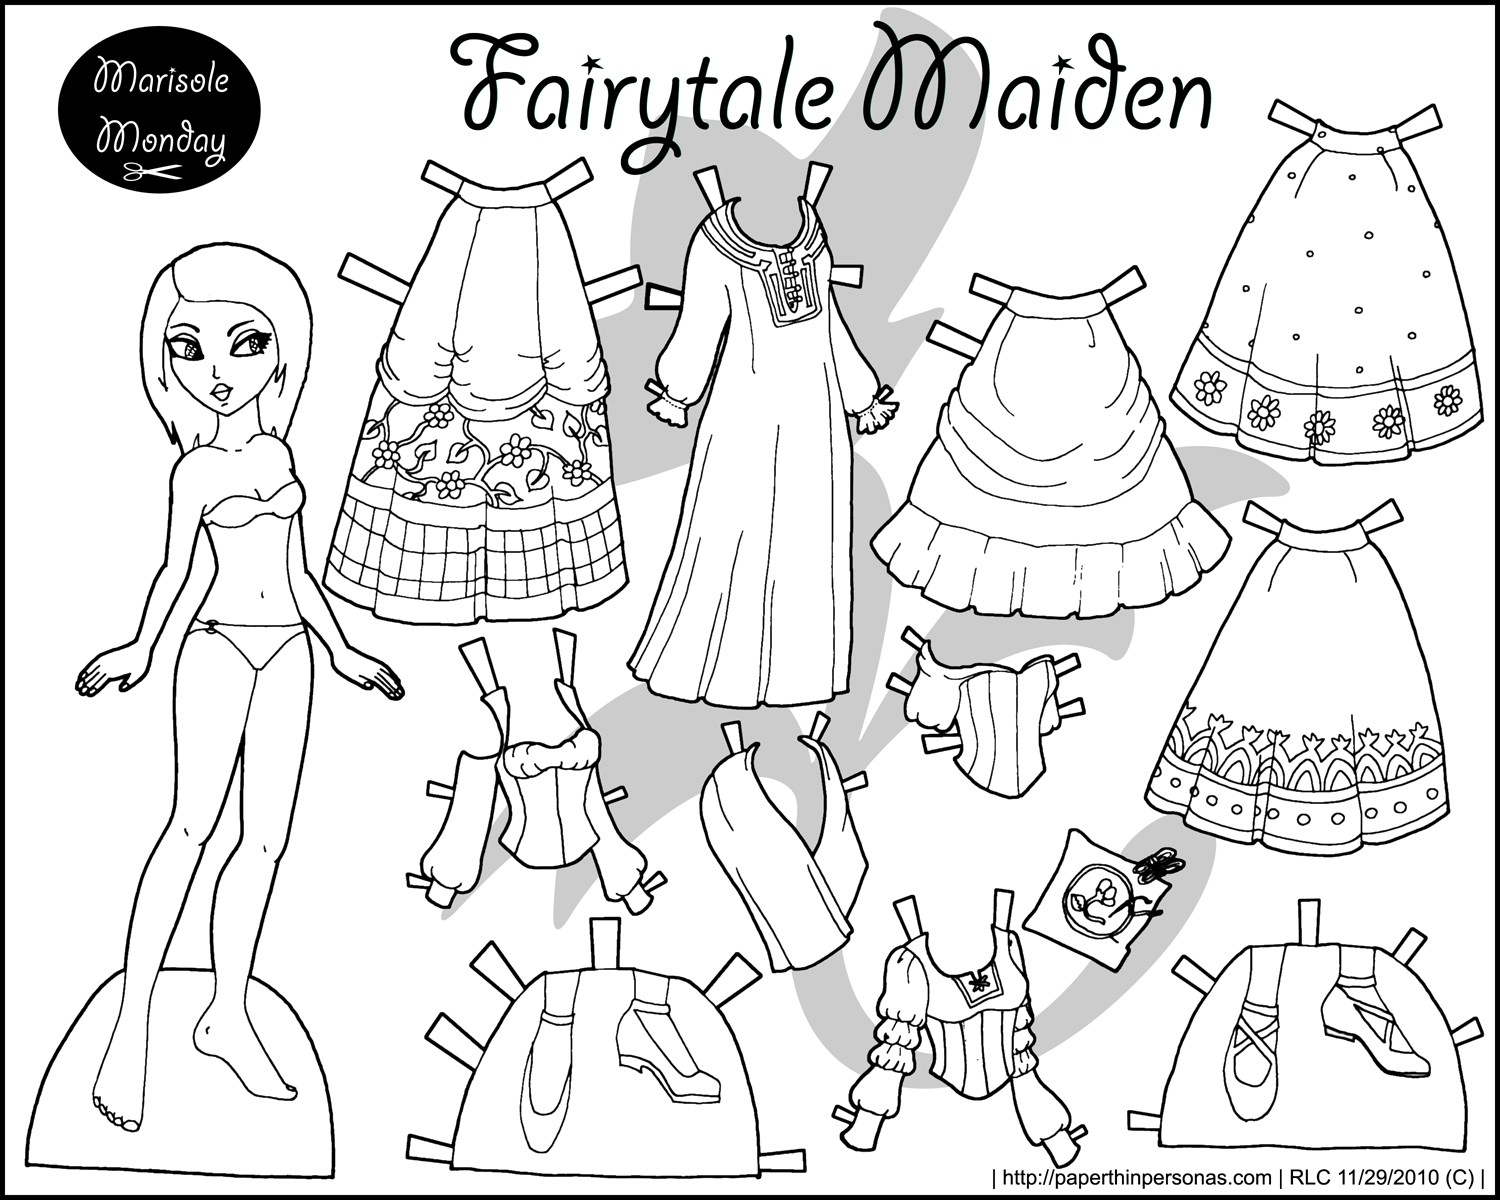 Category: Coloring Page 0 | Coloring Page - Free Printable Paper Doll Coloring Pages